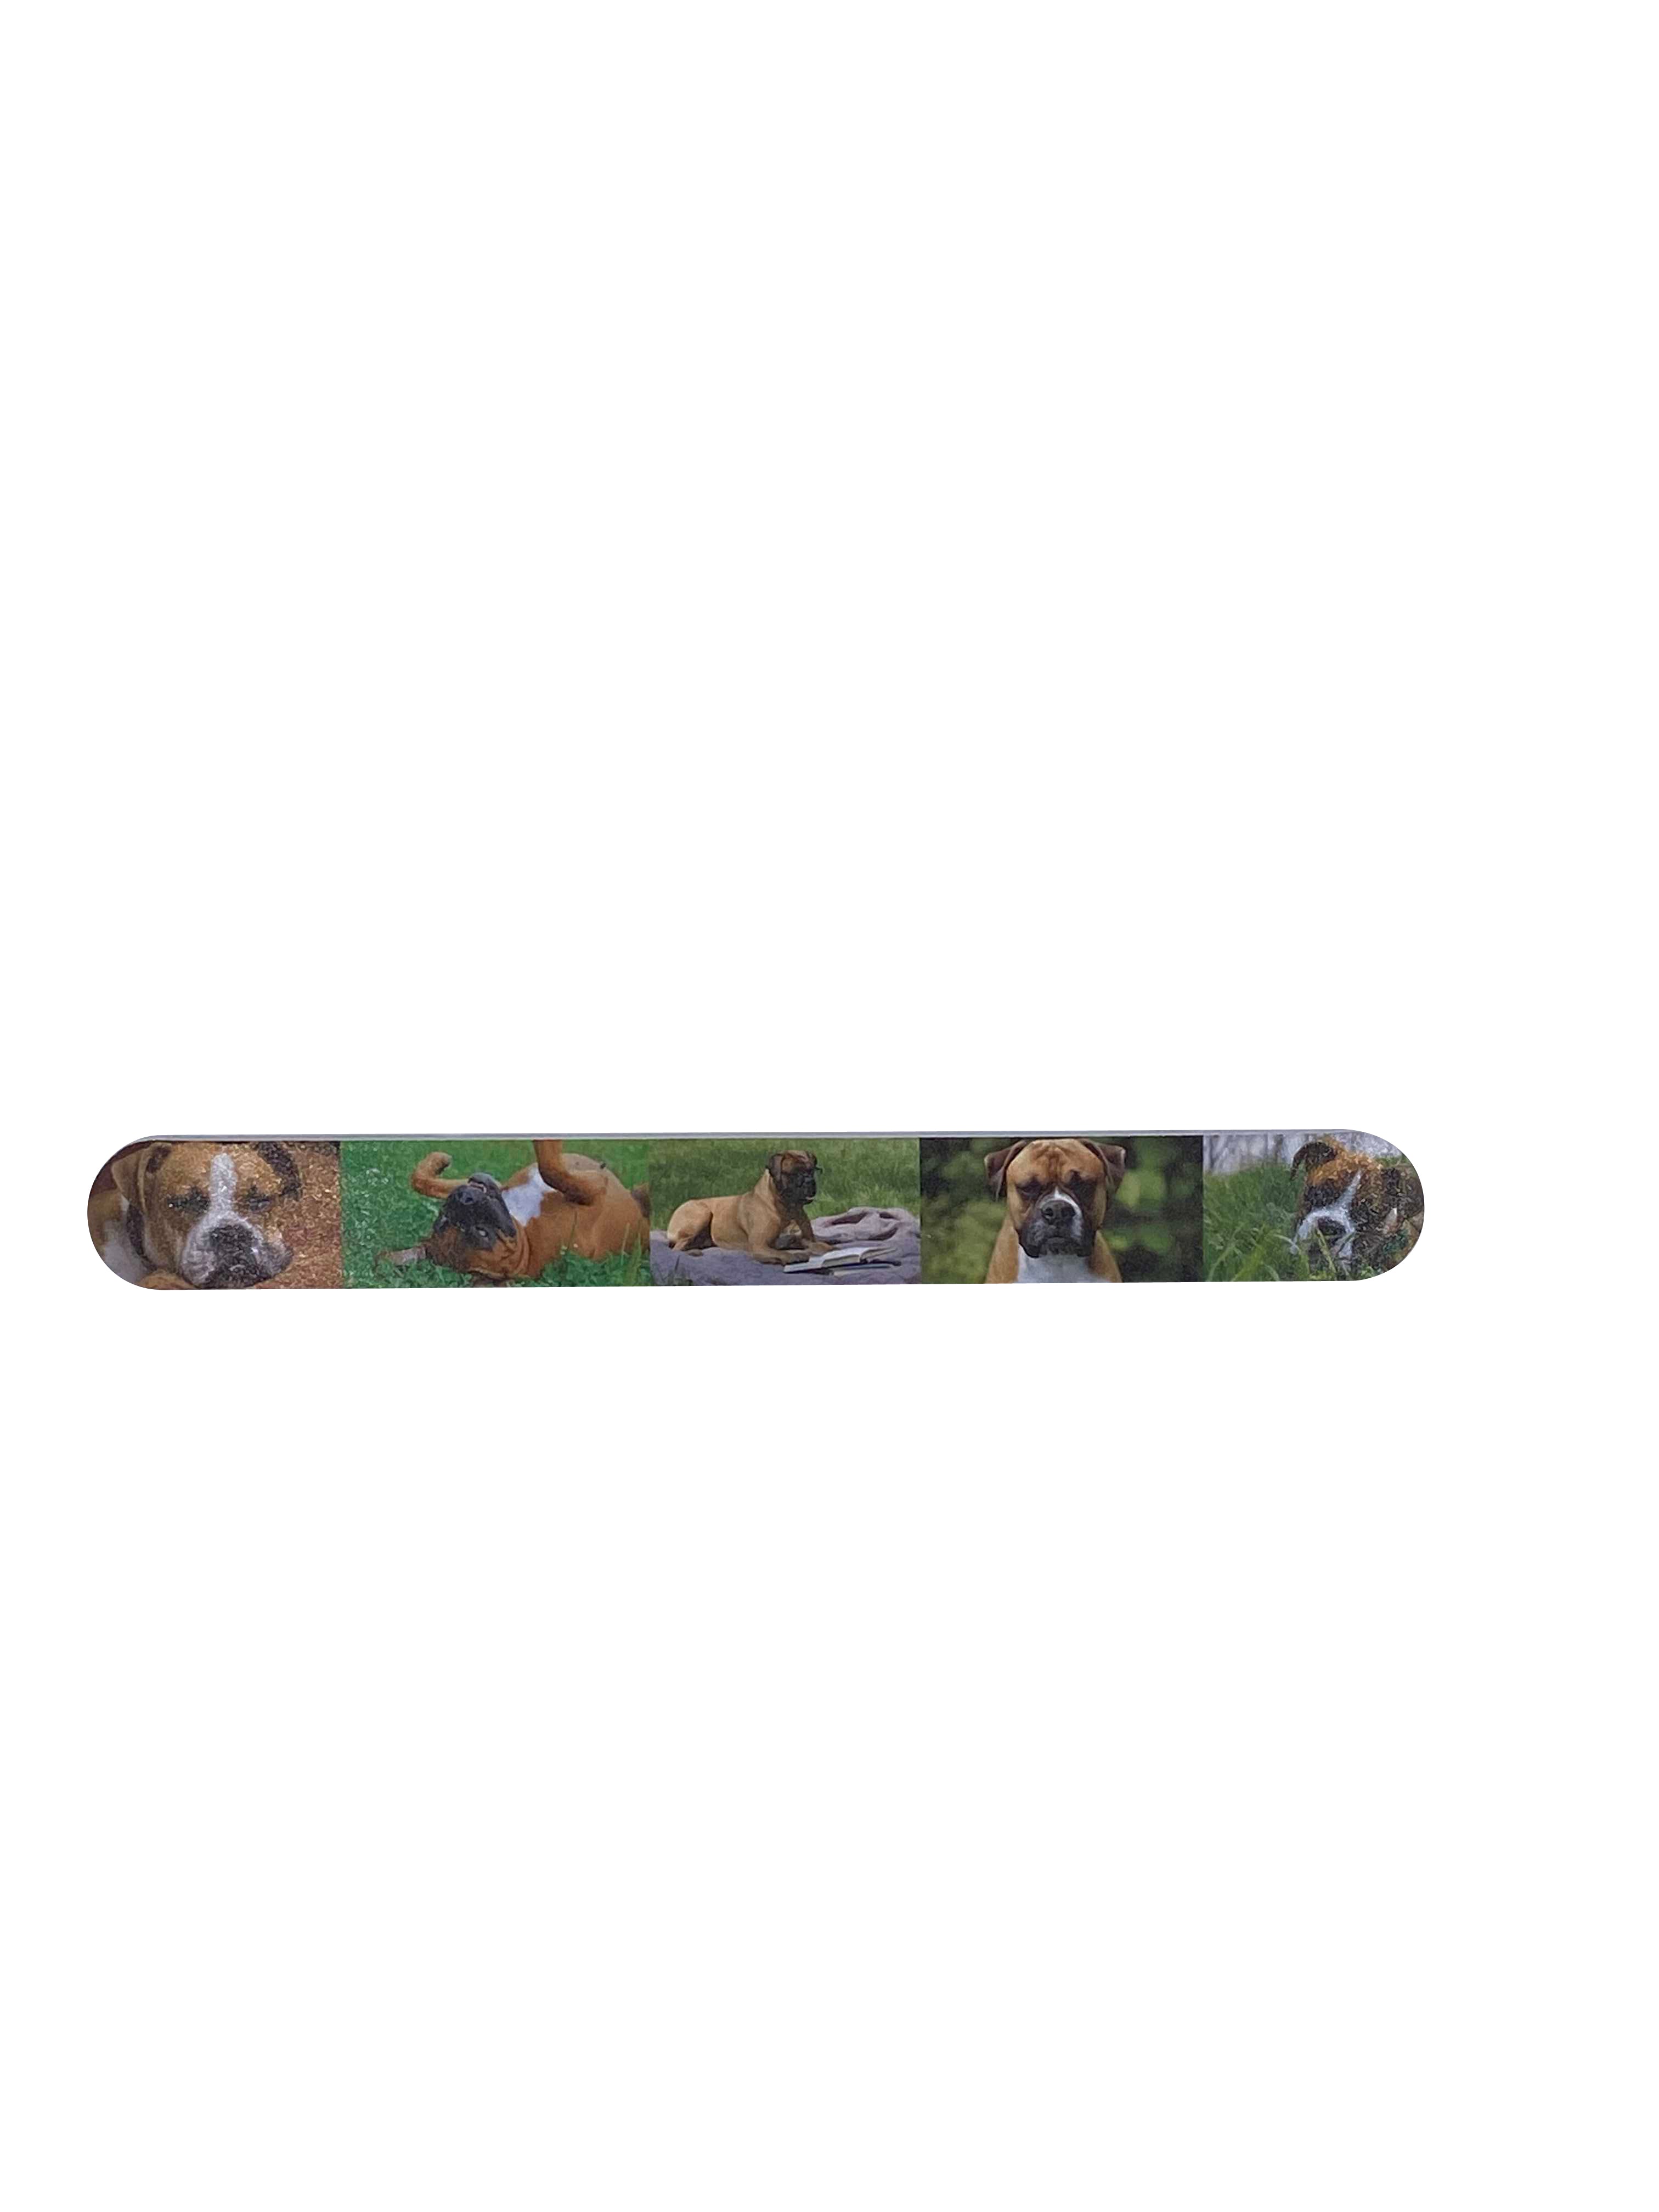 Nail File - For Dogs or Humans - 6 Pack Deals & Packages Warren London Boxers 1 File 